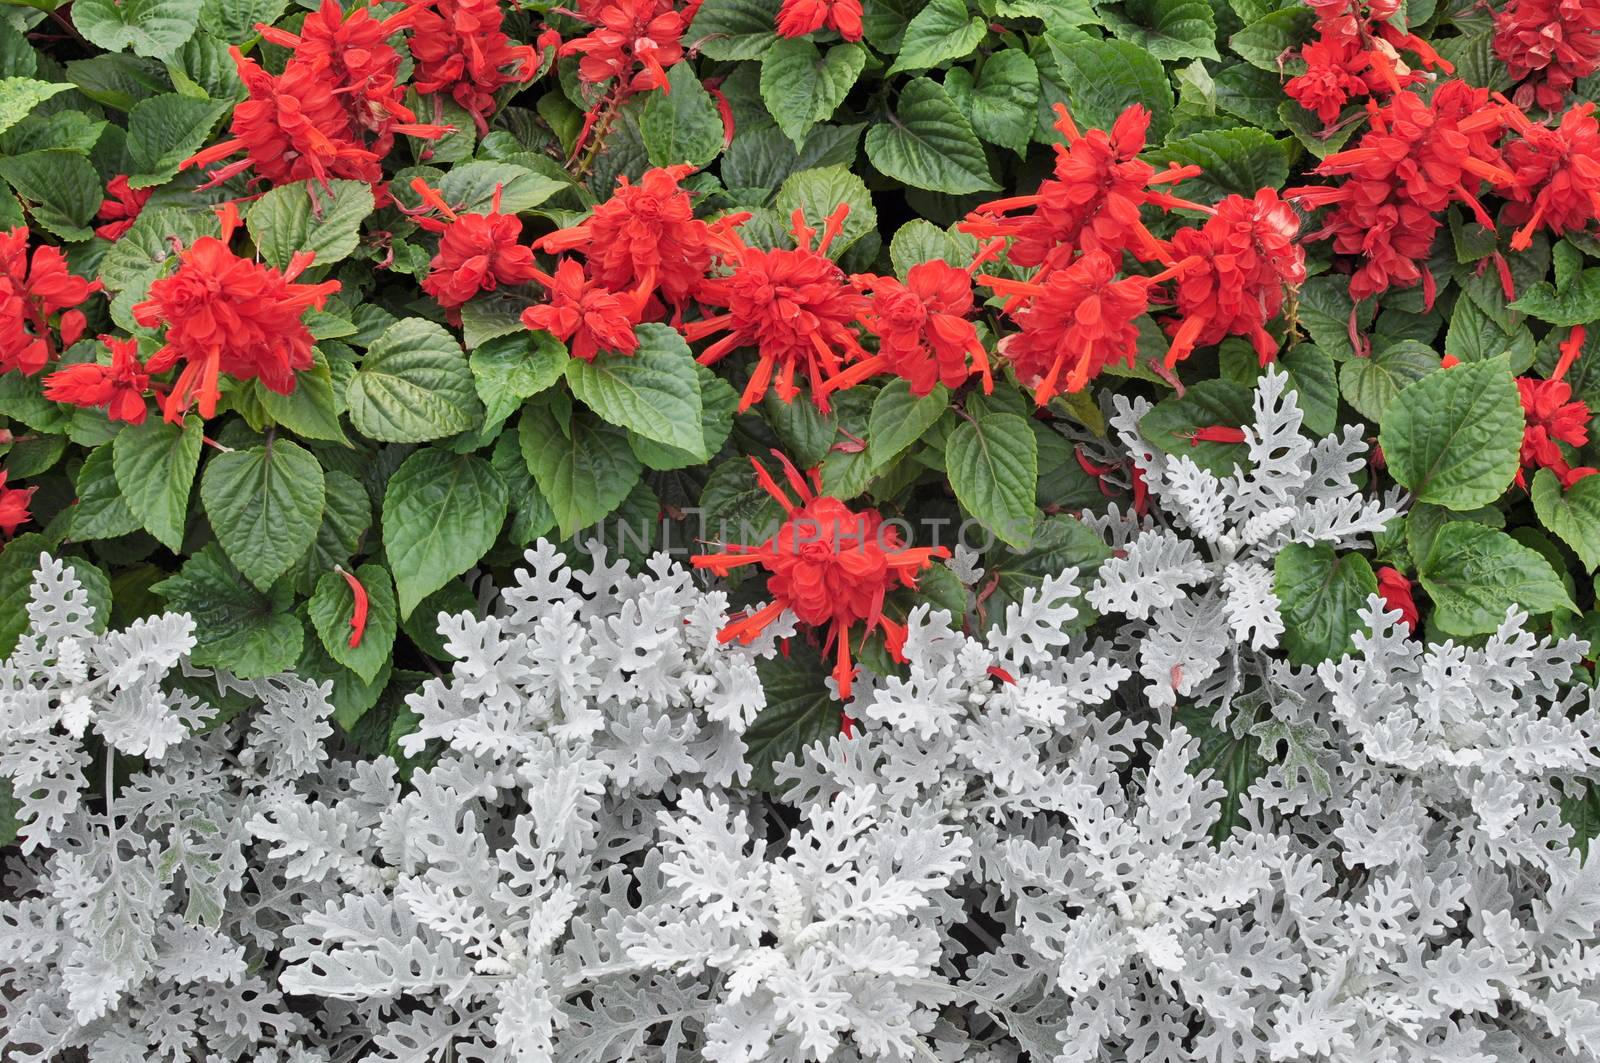 Ornamental Plants for Landscaping, Red Flowers and Green and White Leaves